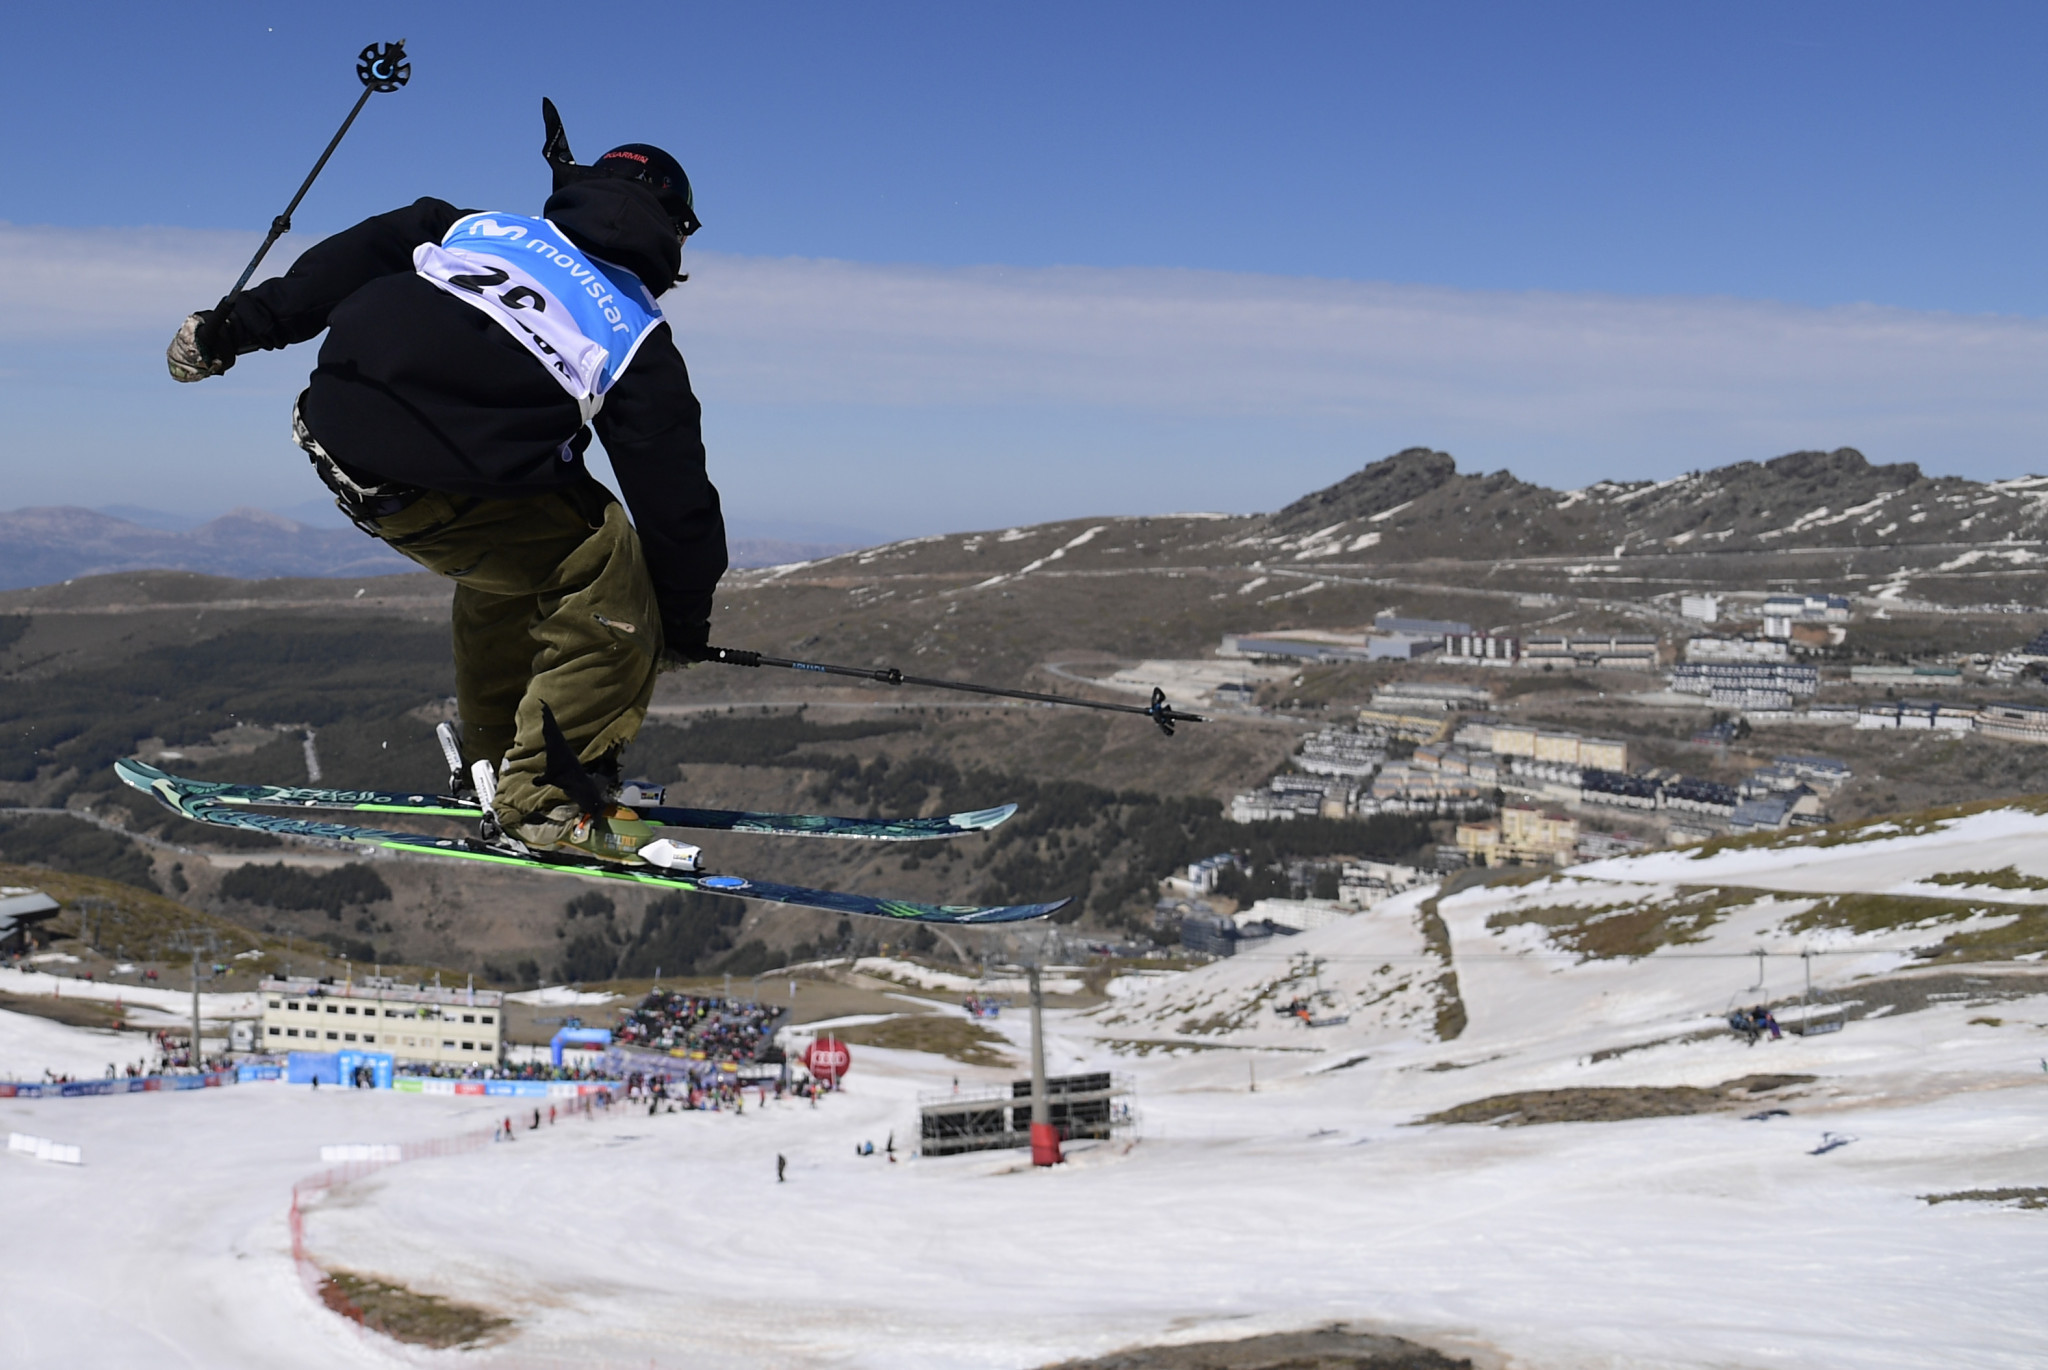 Harlaut wins second gold medal at Winter X-Games